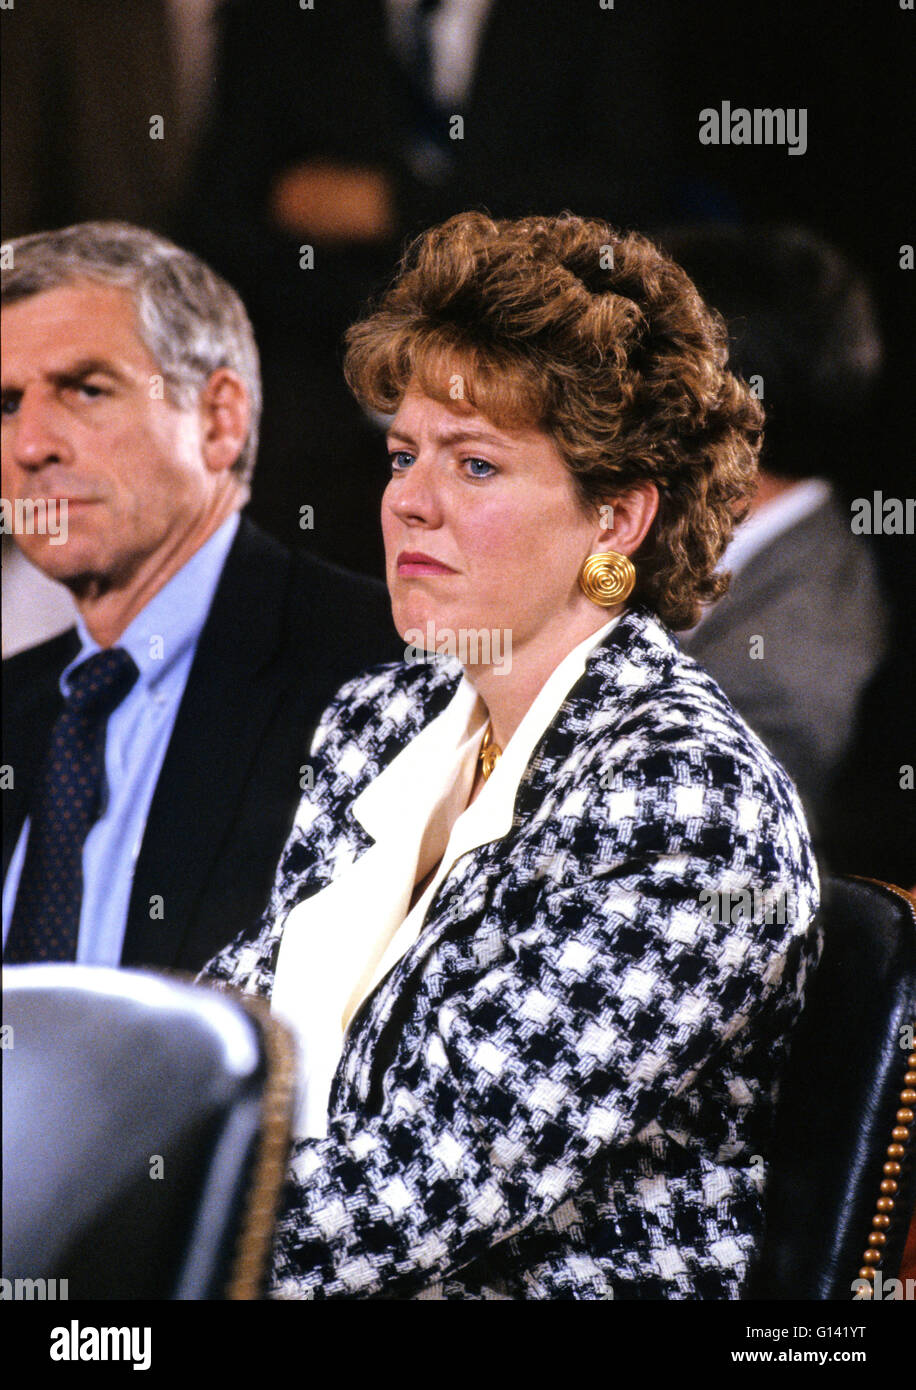 Virginia Thomas, wife of Judge Clarence Thomas, sheds a tear as she ...